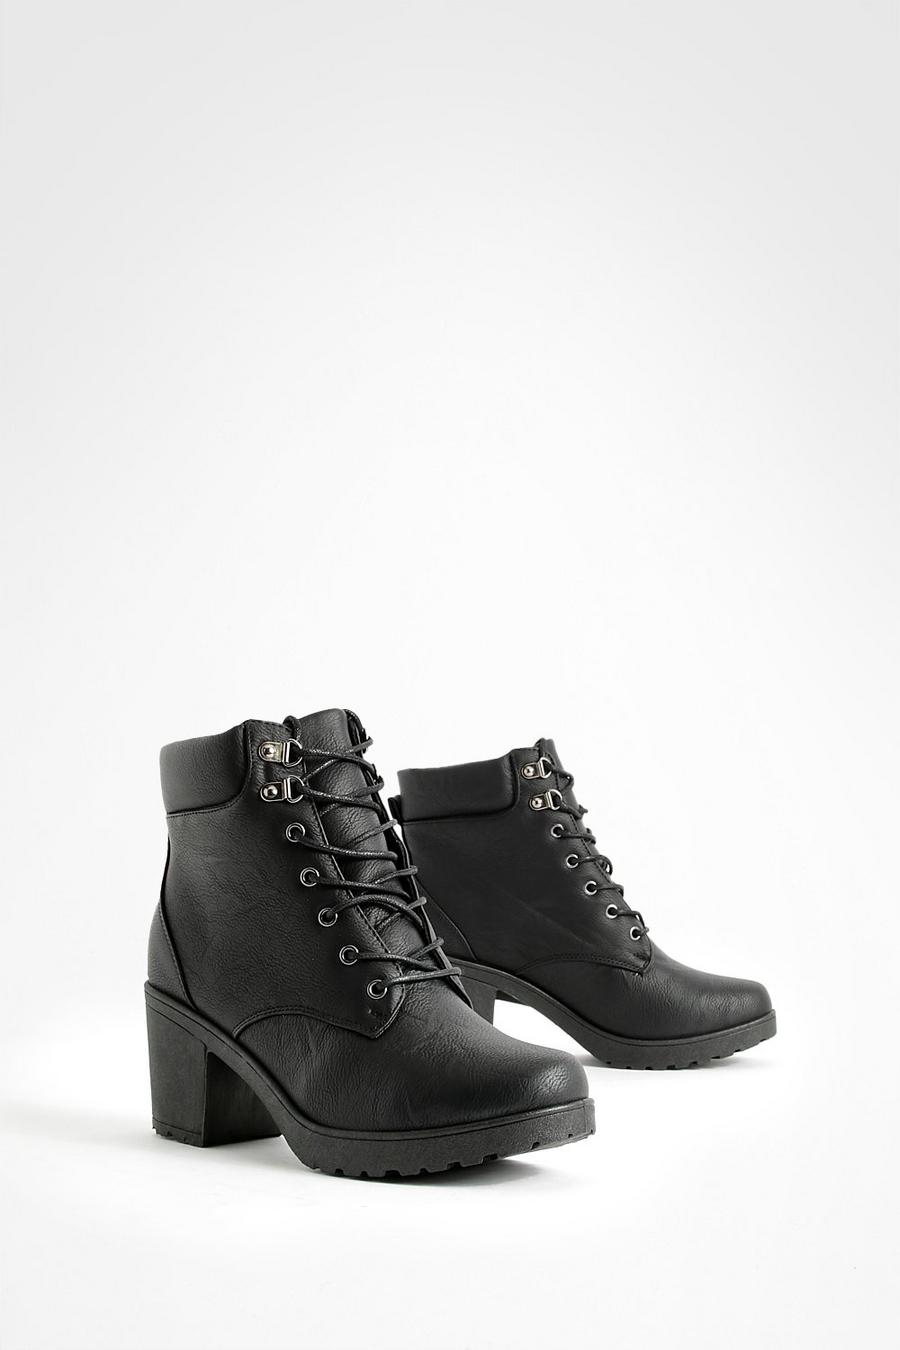 Black nero Wide Fit Lace Up Heeled Hiker Boots